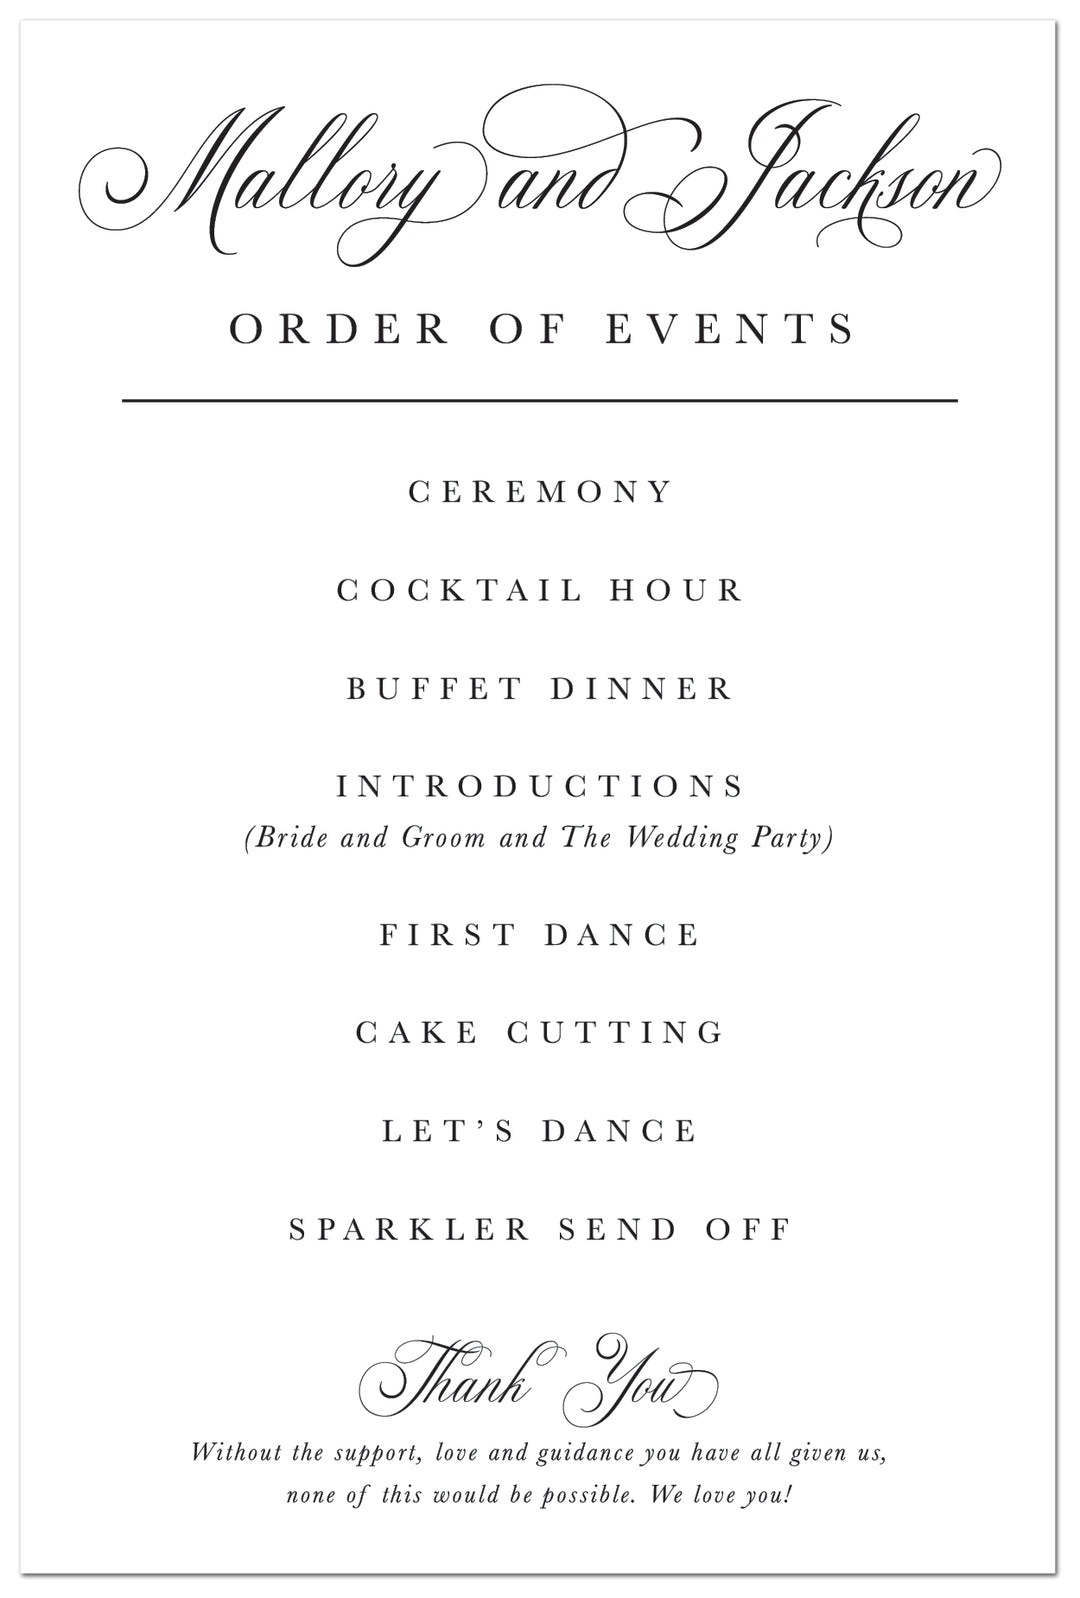 The Mallory Order of Events Sign